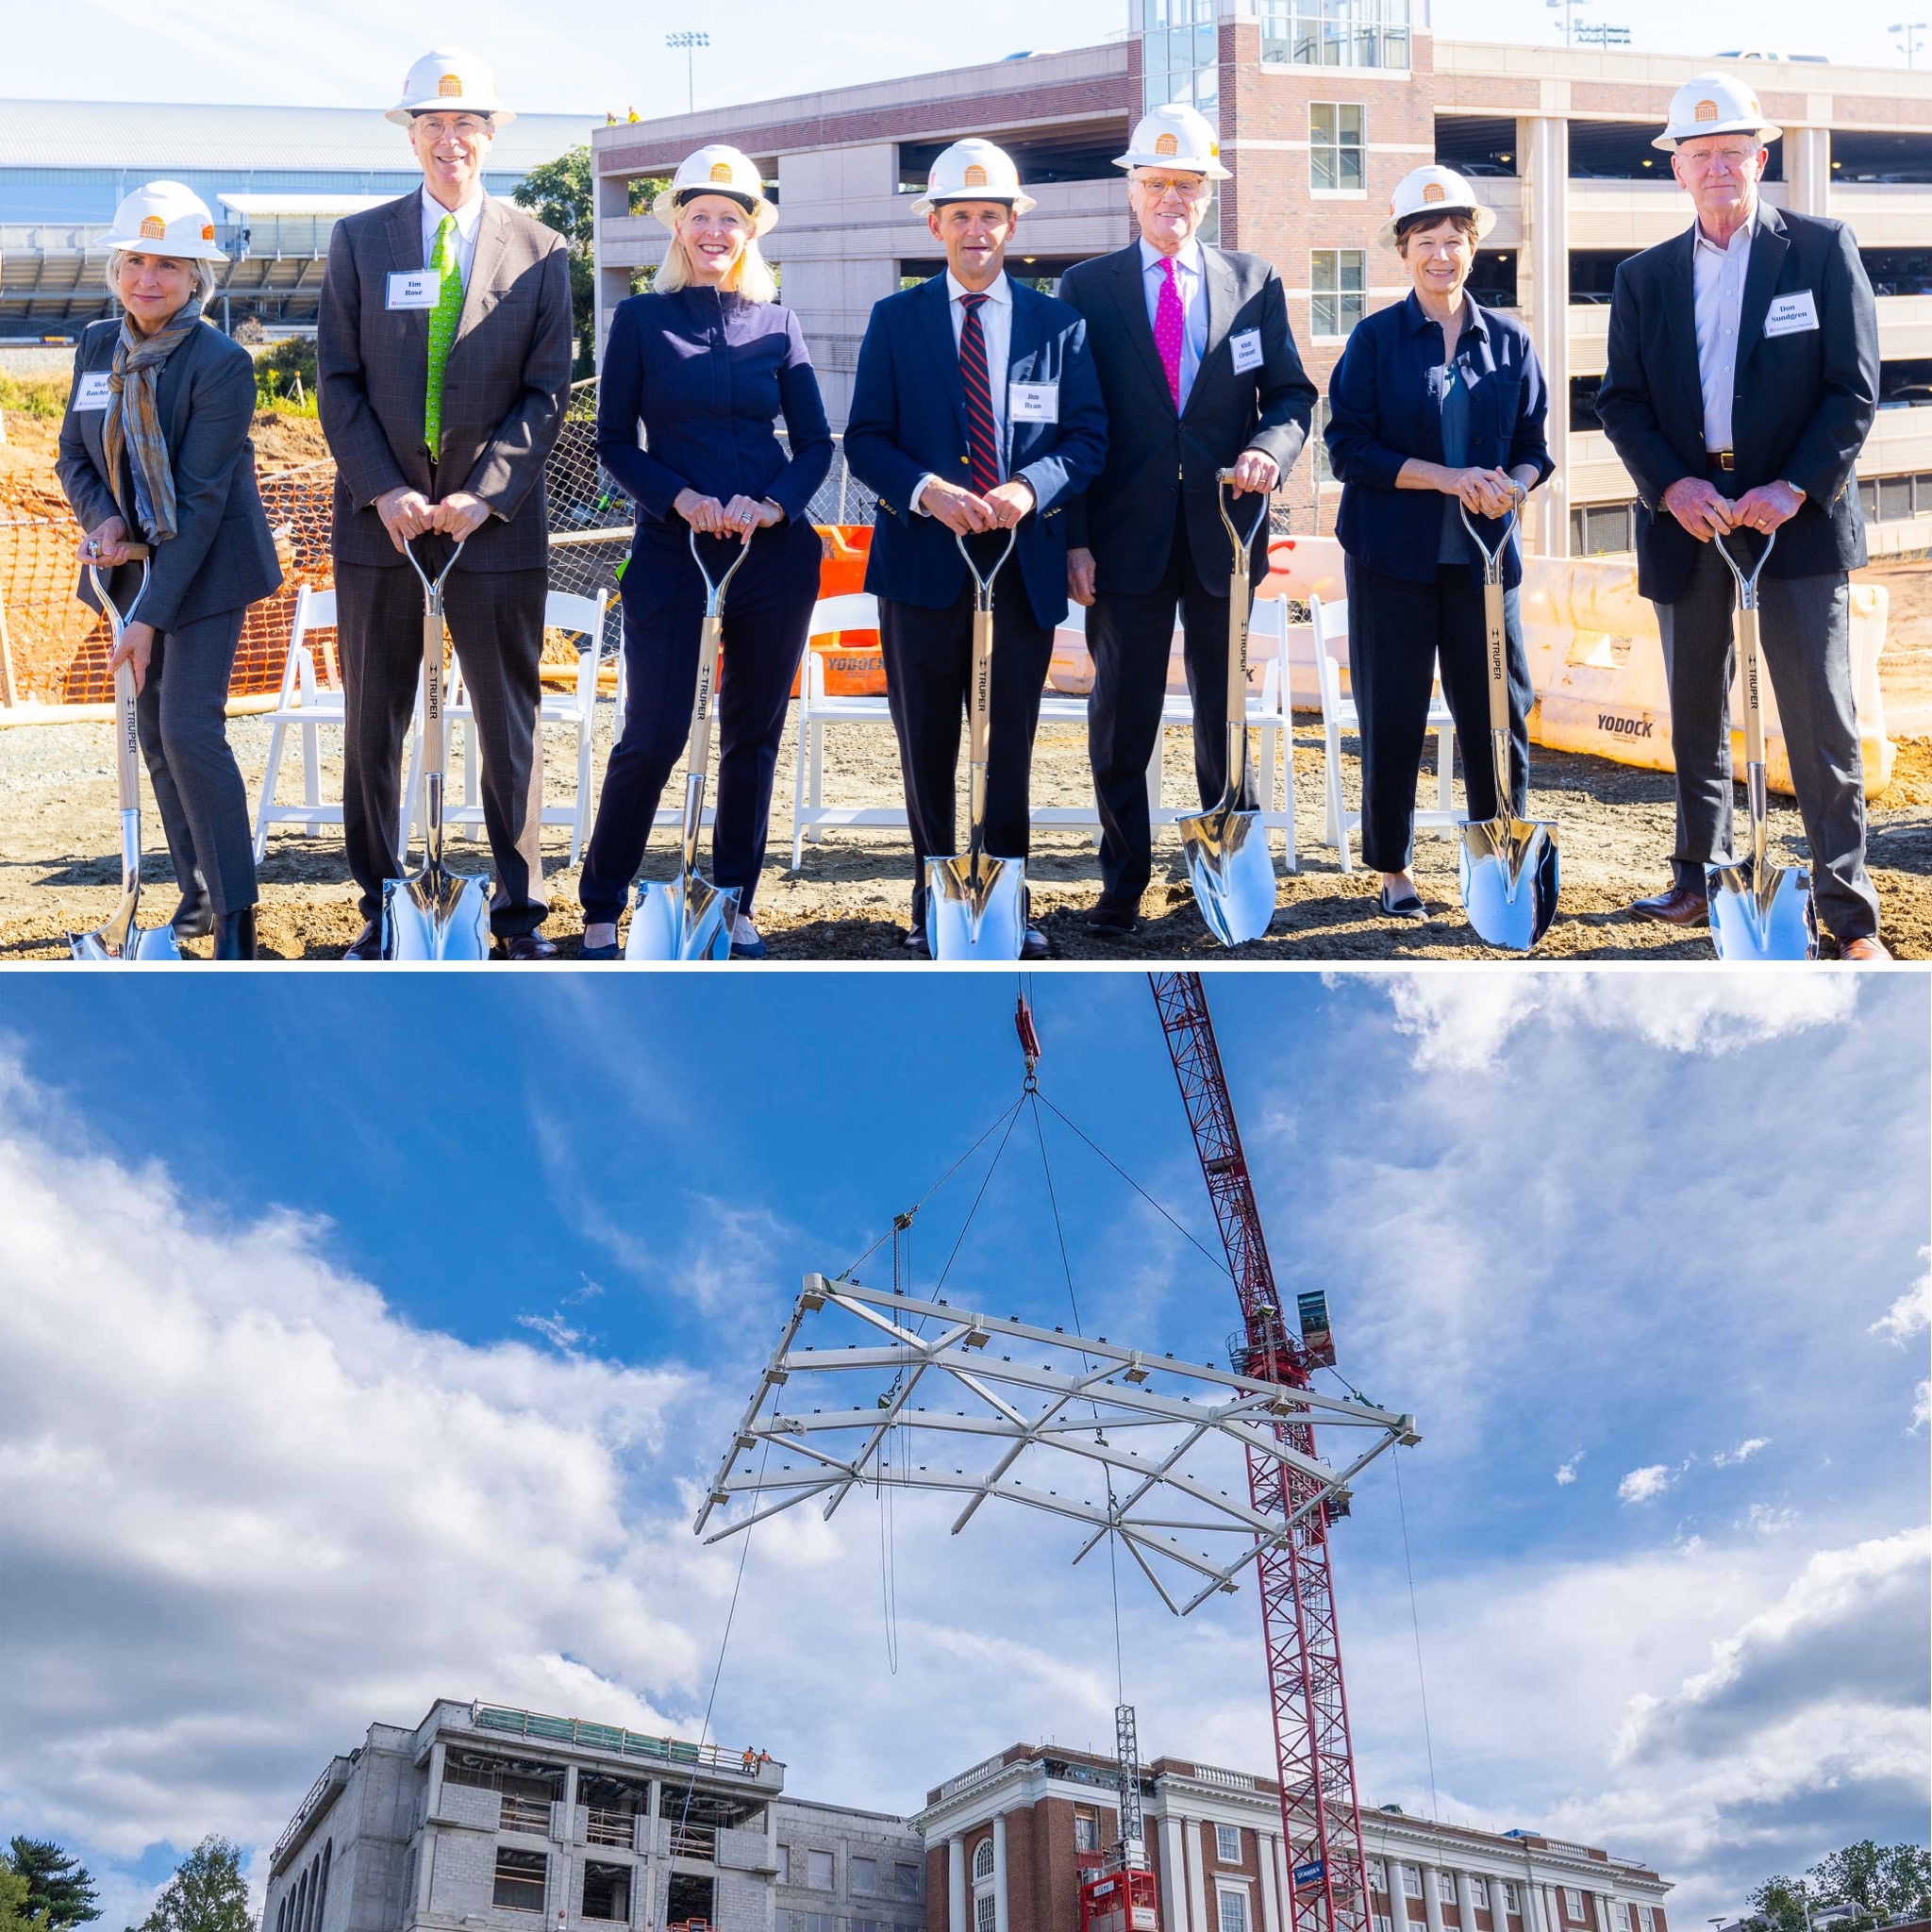 Top: Hotel and Conference Center Groundbreaking; Bottom: library skylight hoisted in place by a crane